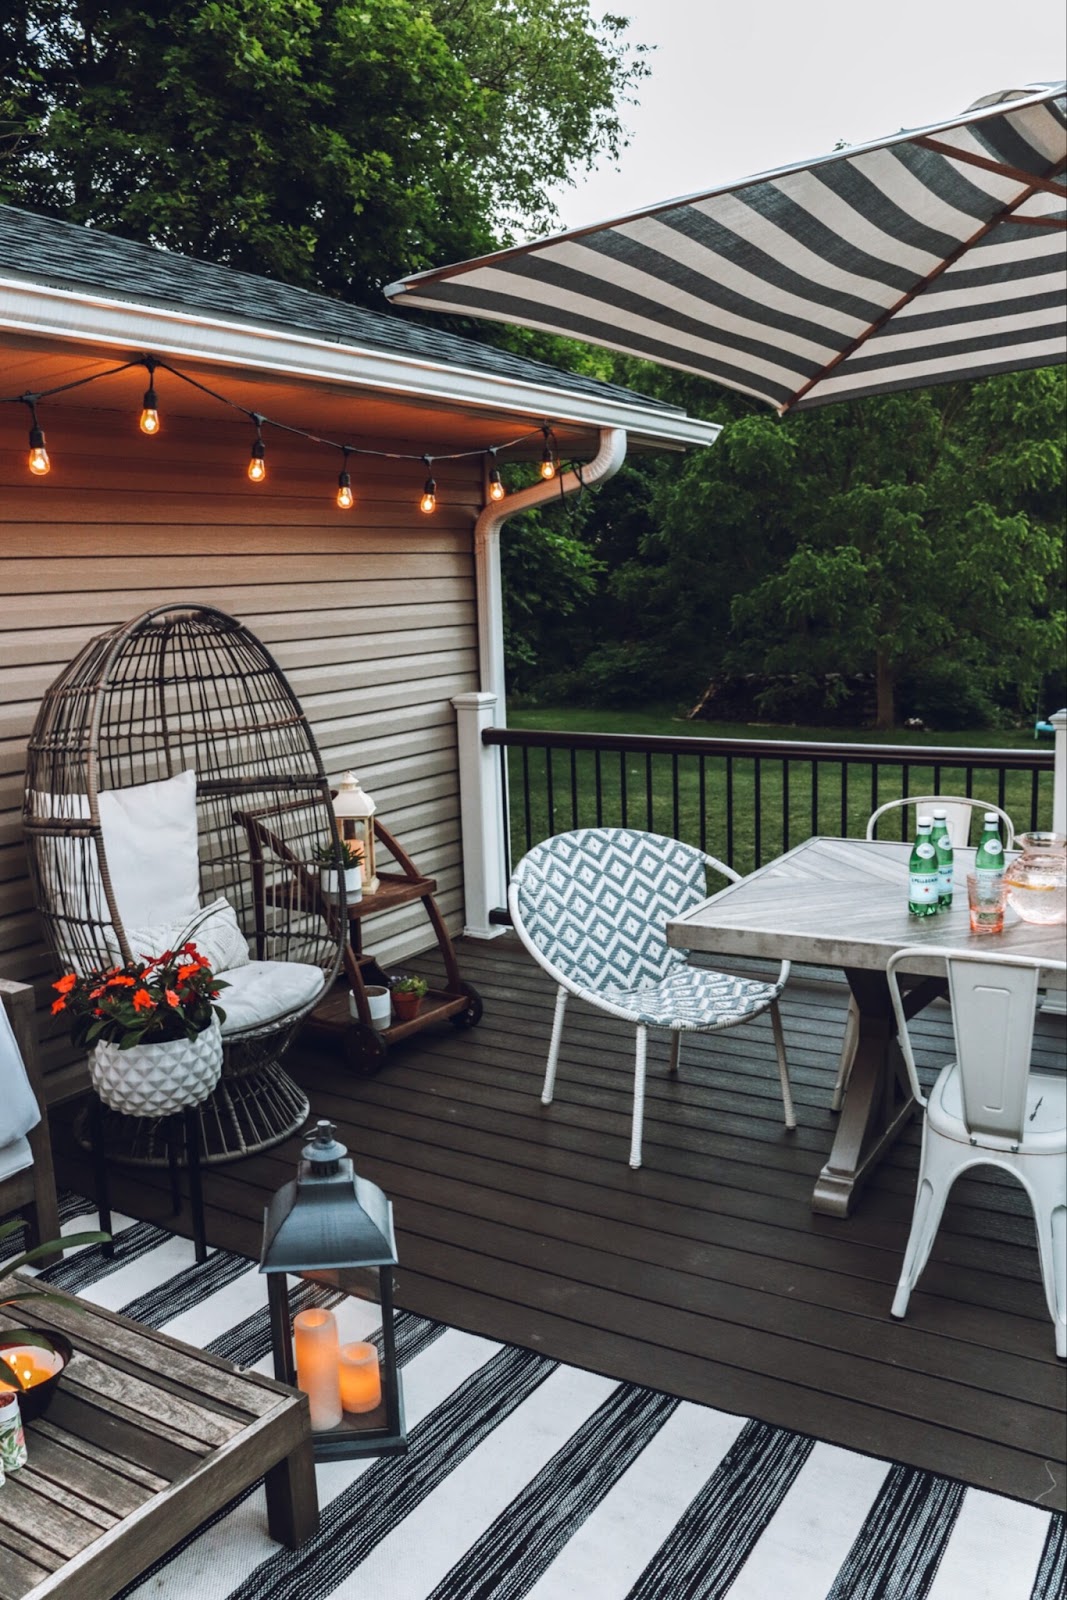 45 Pallet Deck Ideas To Make Your Outdoors A Dreamy Oasis